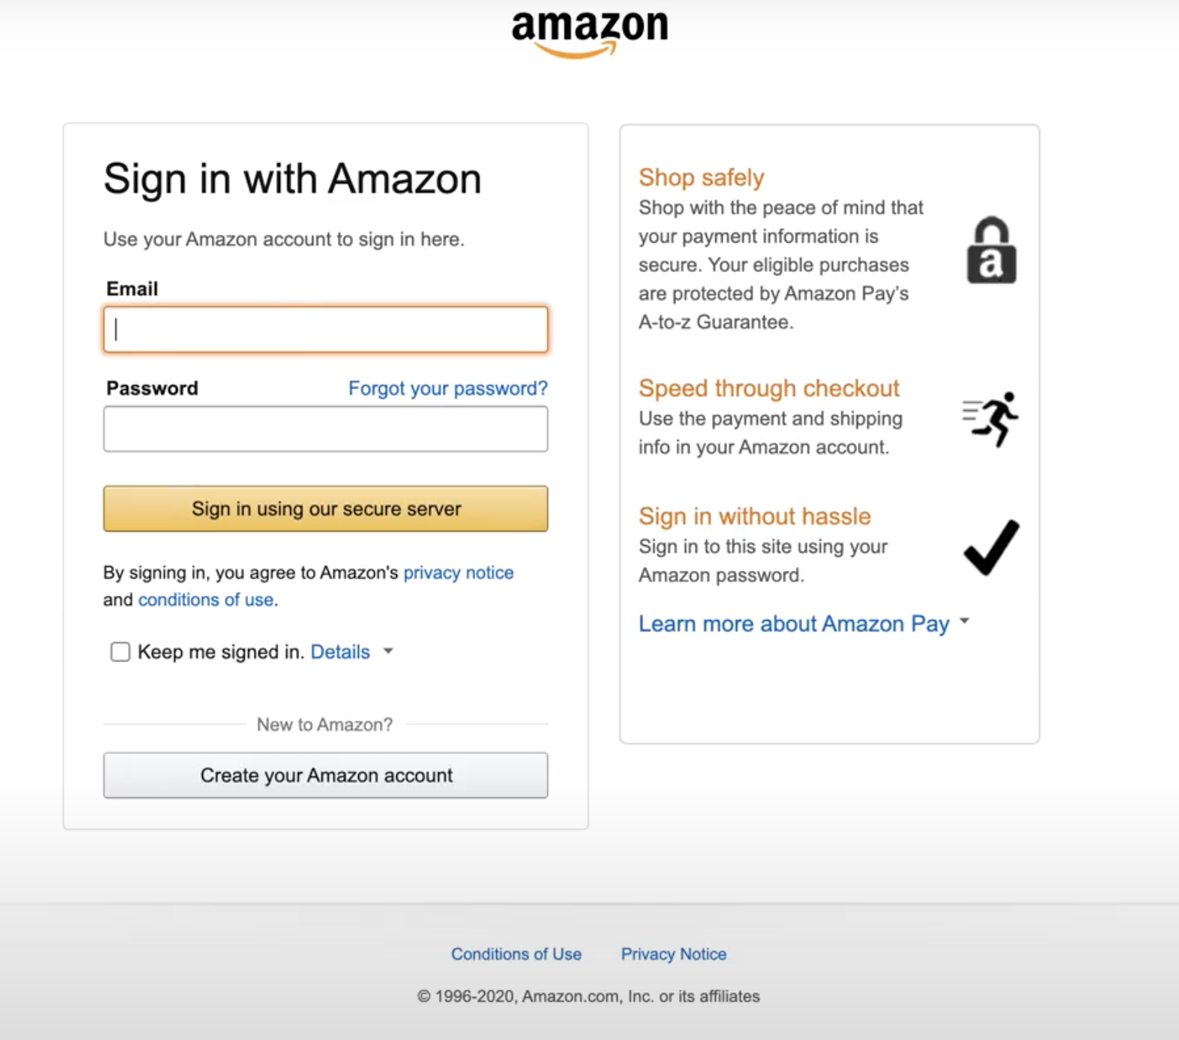 The sign in page for customers sigining in to their Amazon account